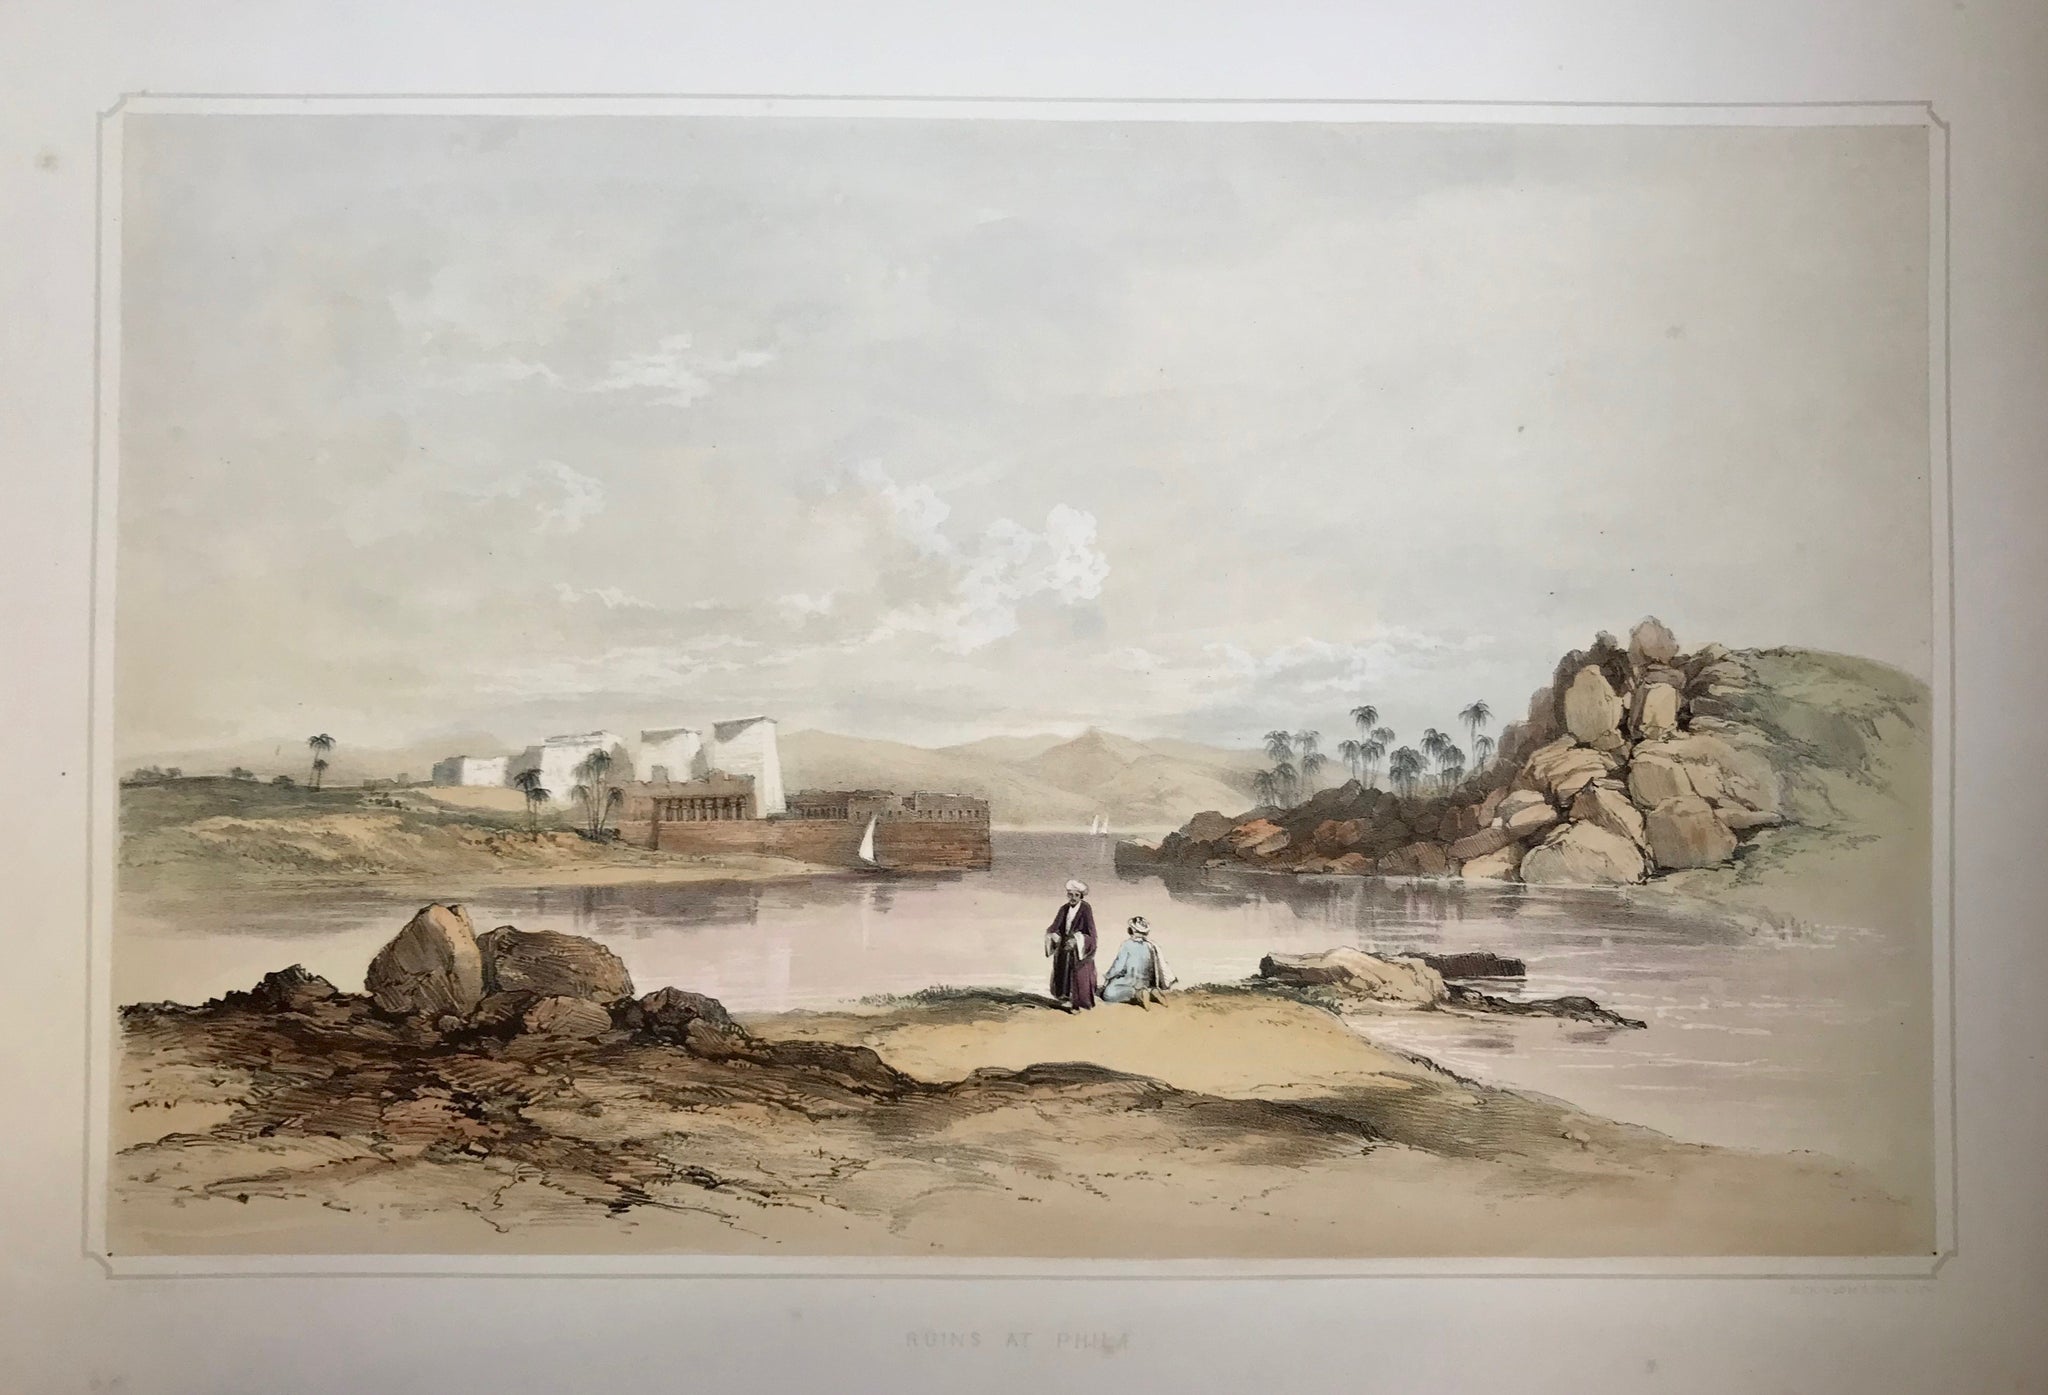 "Ruins at Philae"  Type of print: Lithograph  Color: Toned and Hand-colored  Artist: Henry Pilleau (1813-1899)  Lithographed by: Dickinson & Son  Where: London  When: 1845